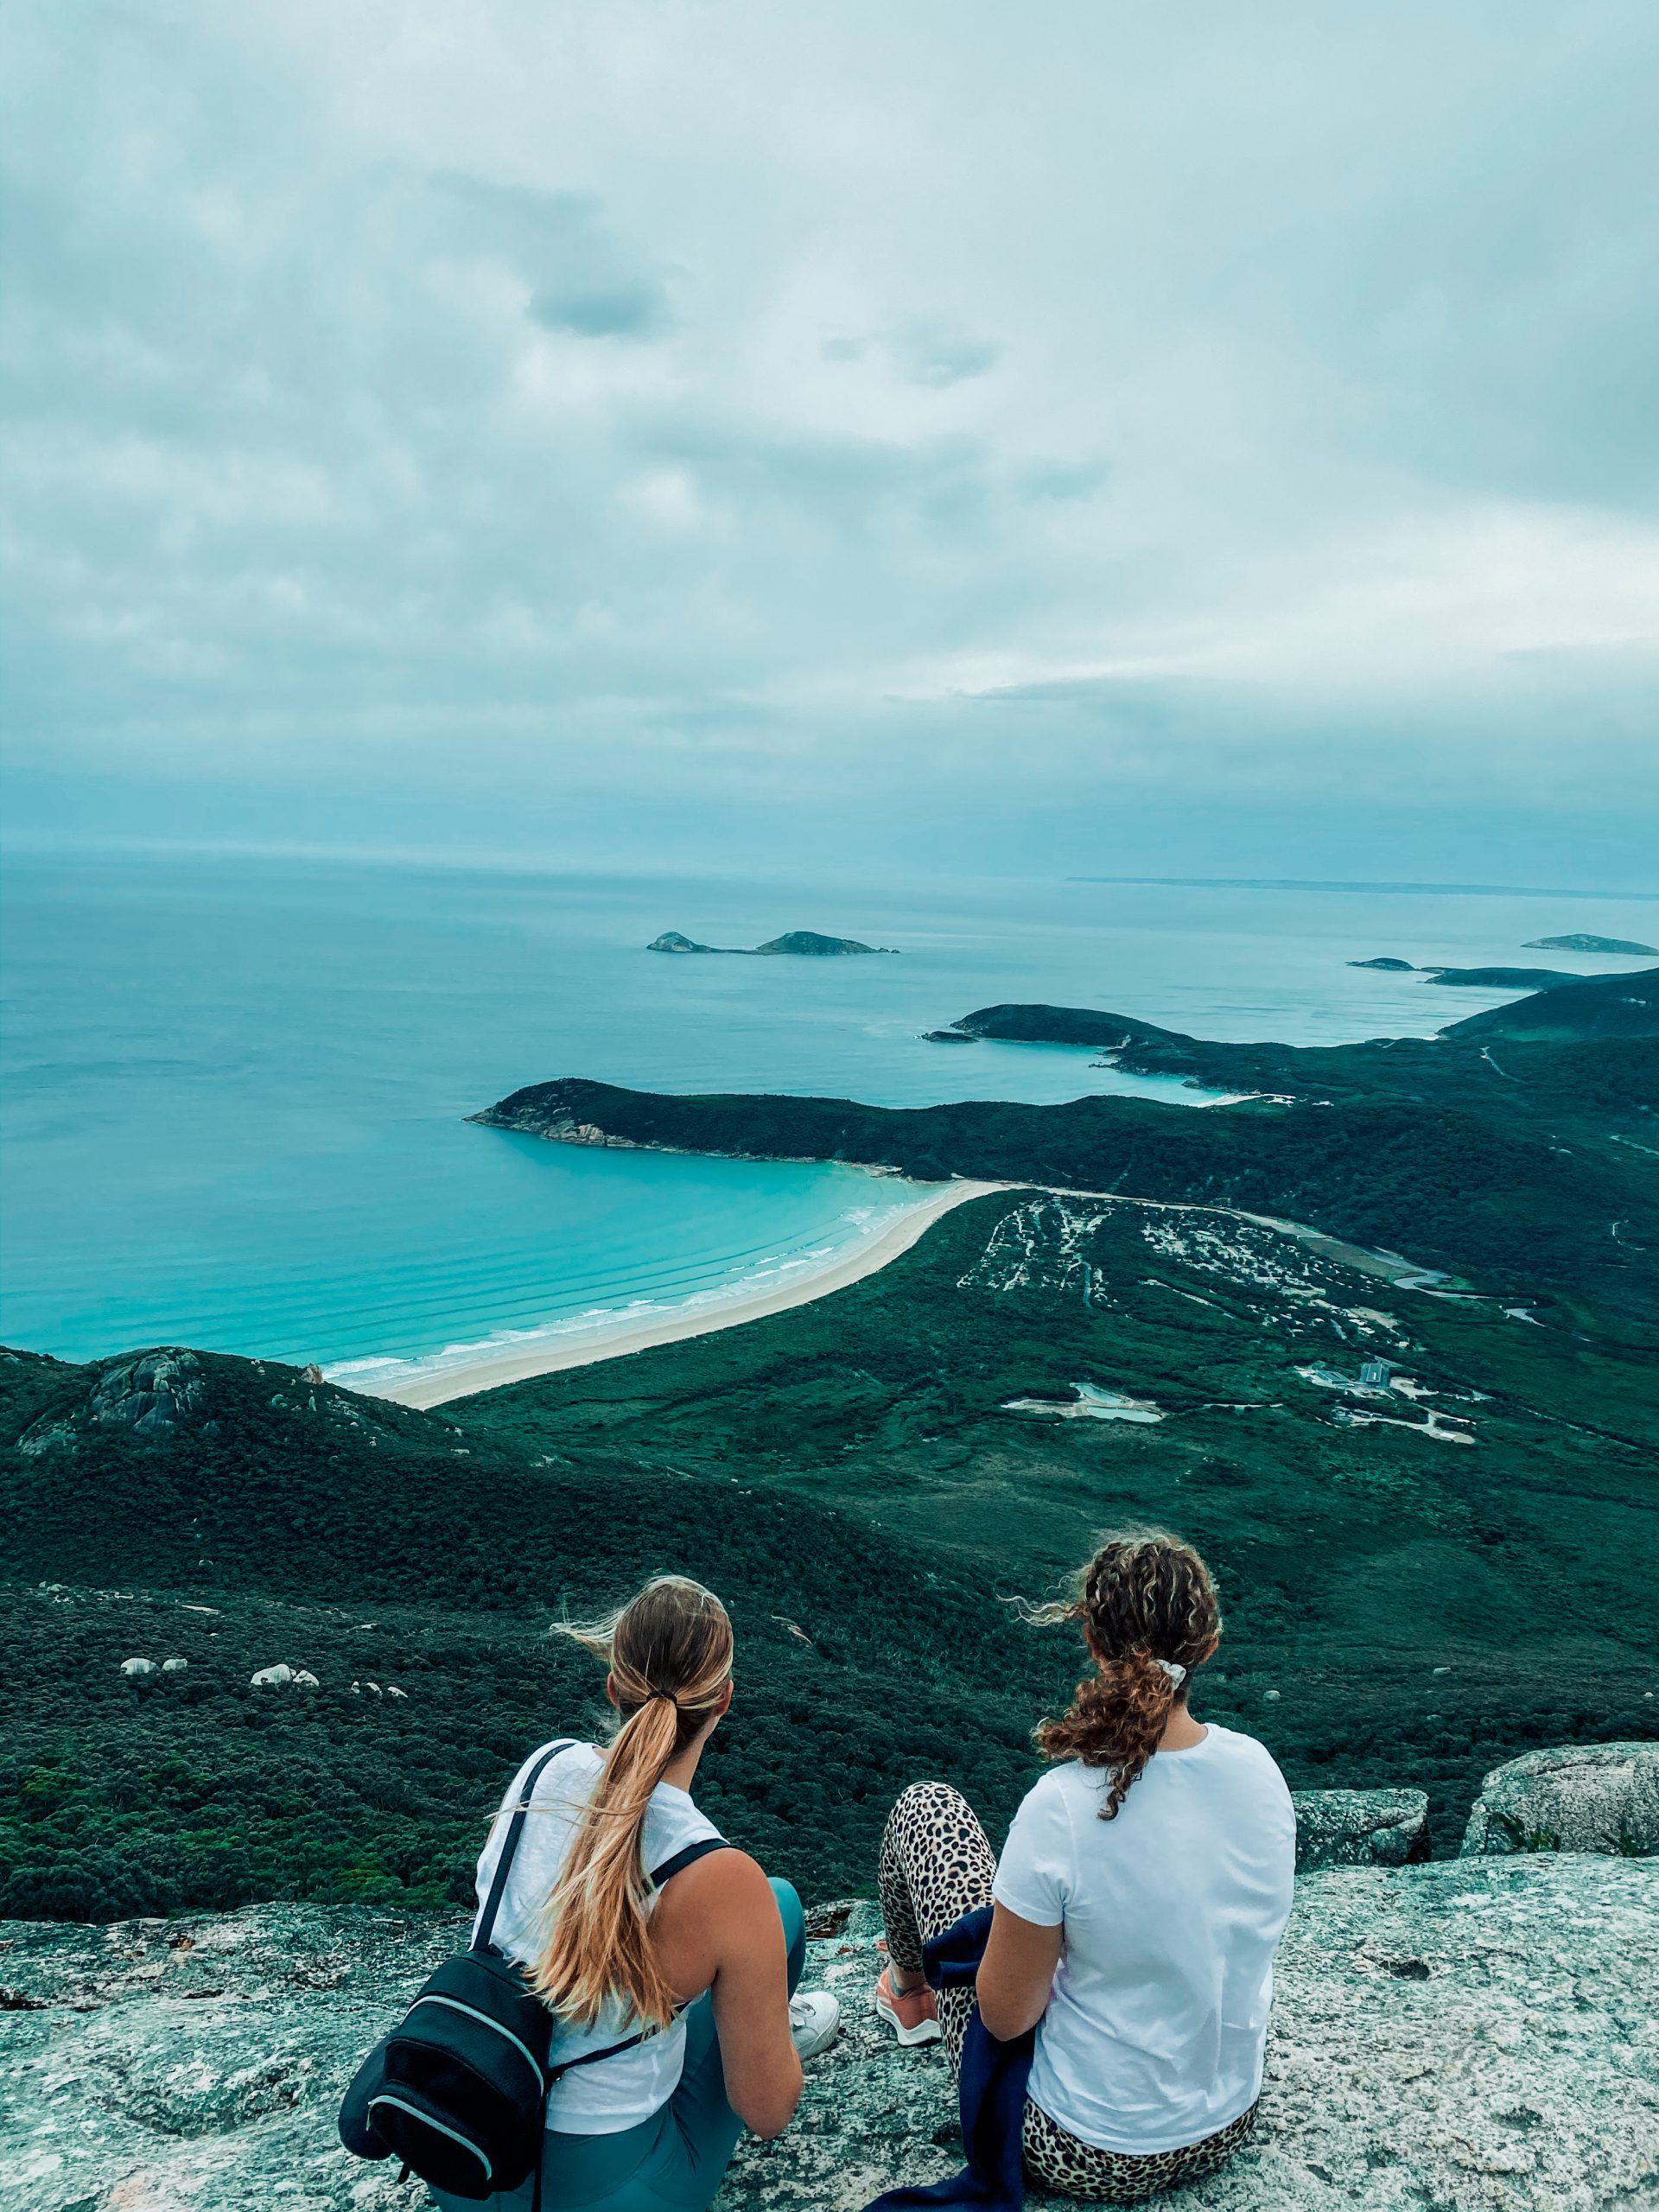 Two people sat on a rock overlooking a coastline with beaches, grassy headlands, blue ocean and islands in the distance.